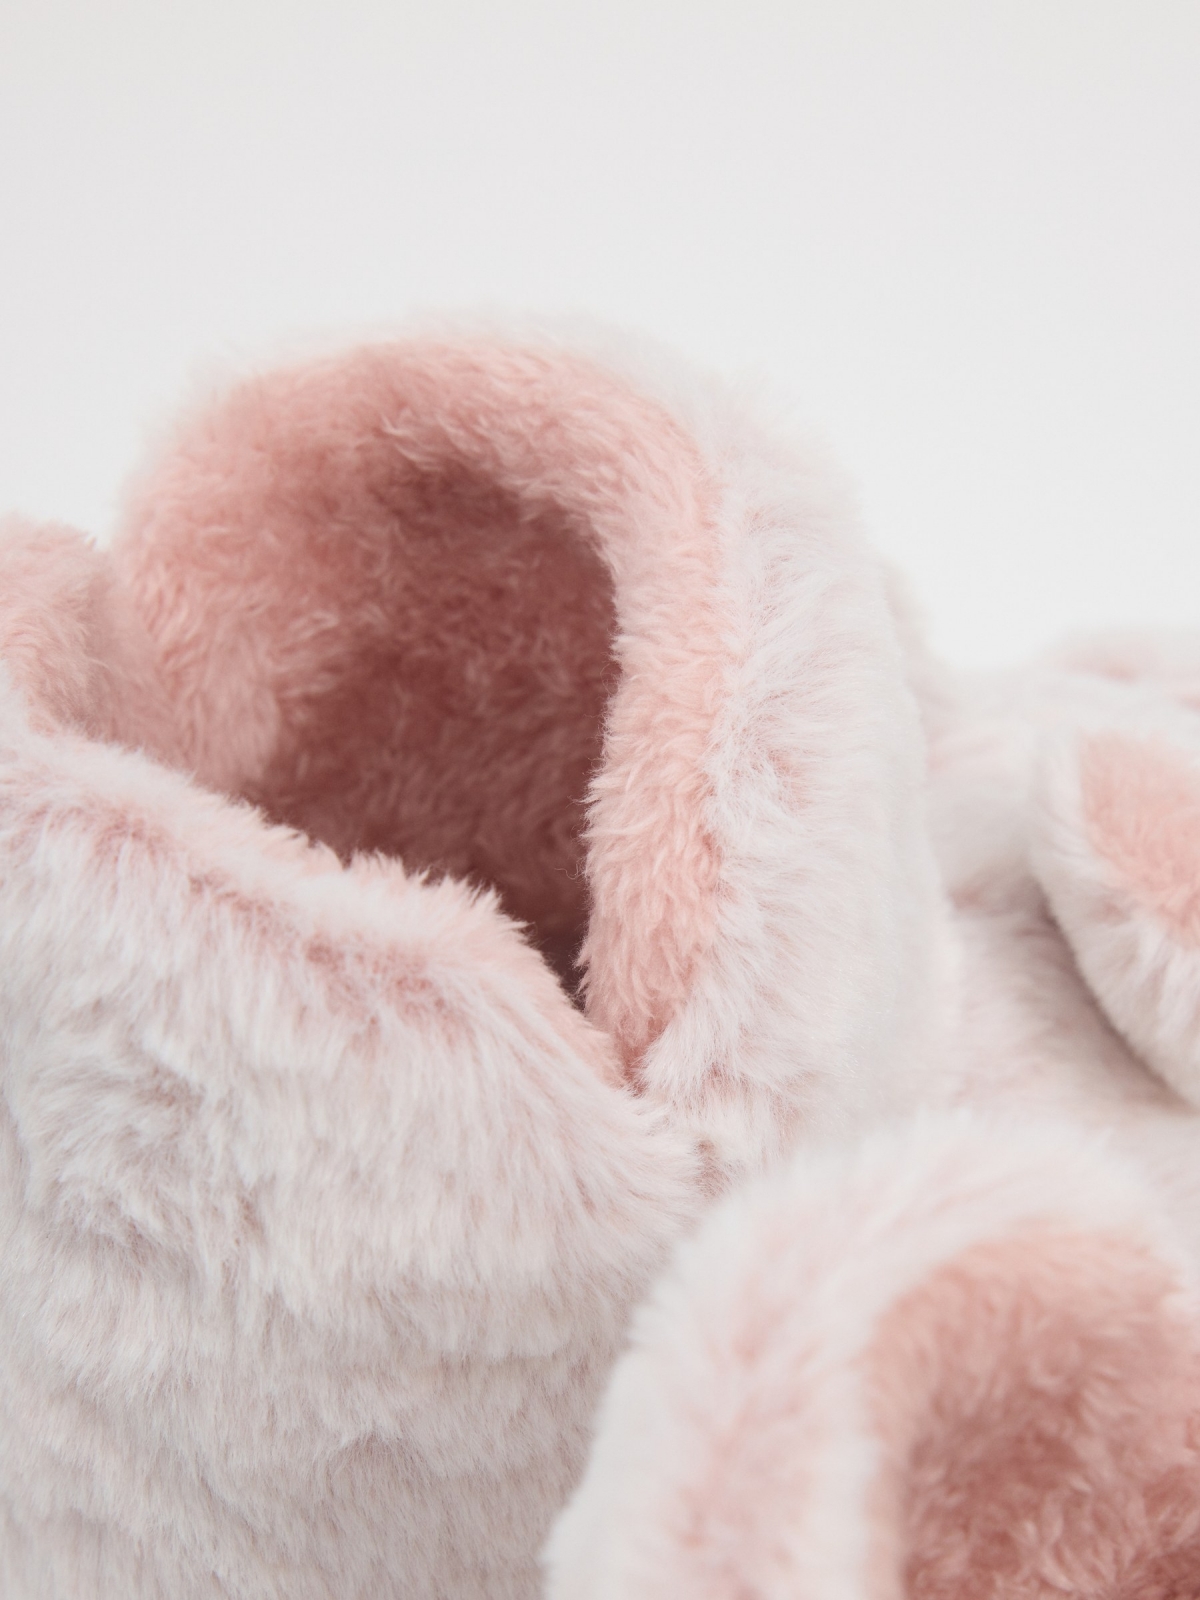 Bunny boots home slippers pink detail view